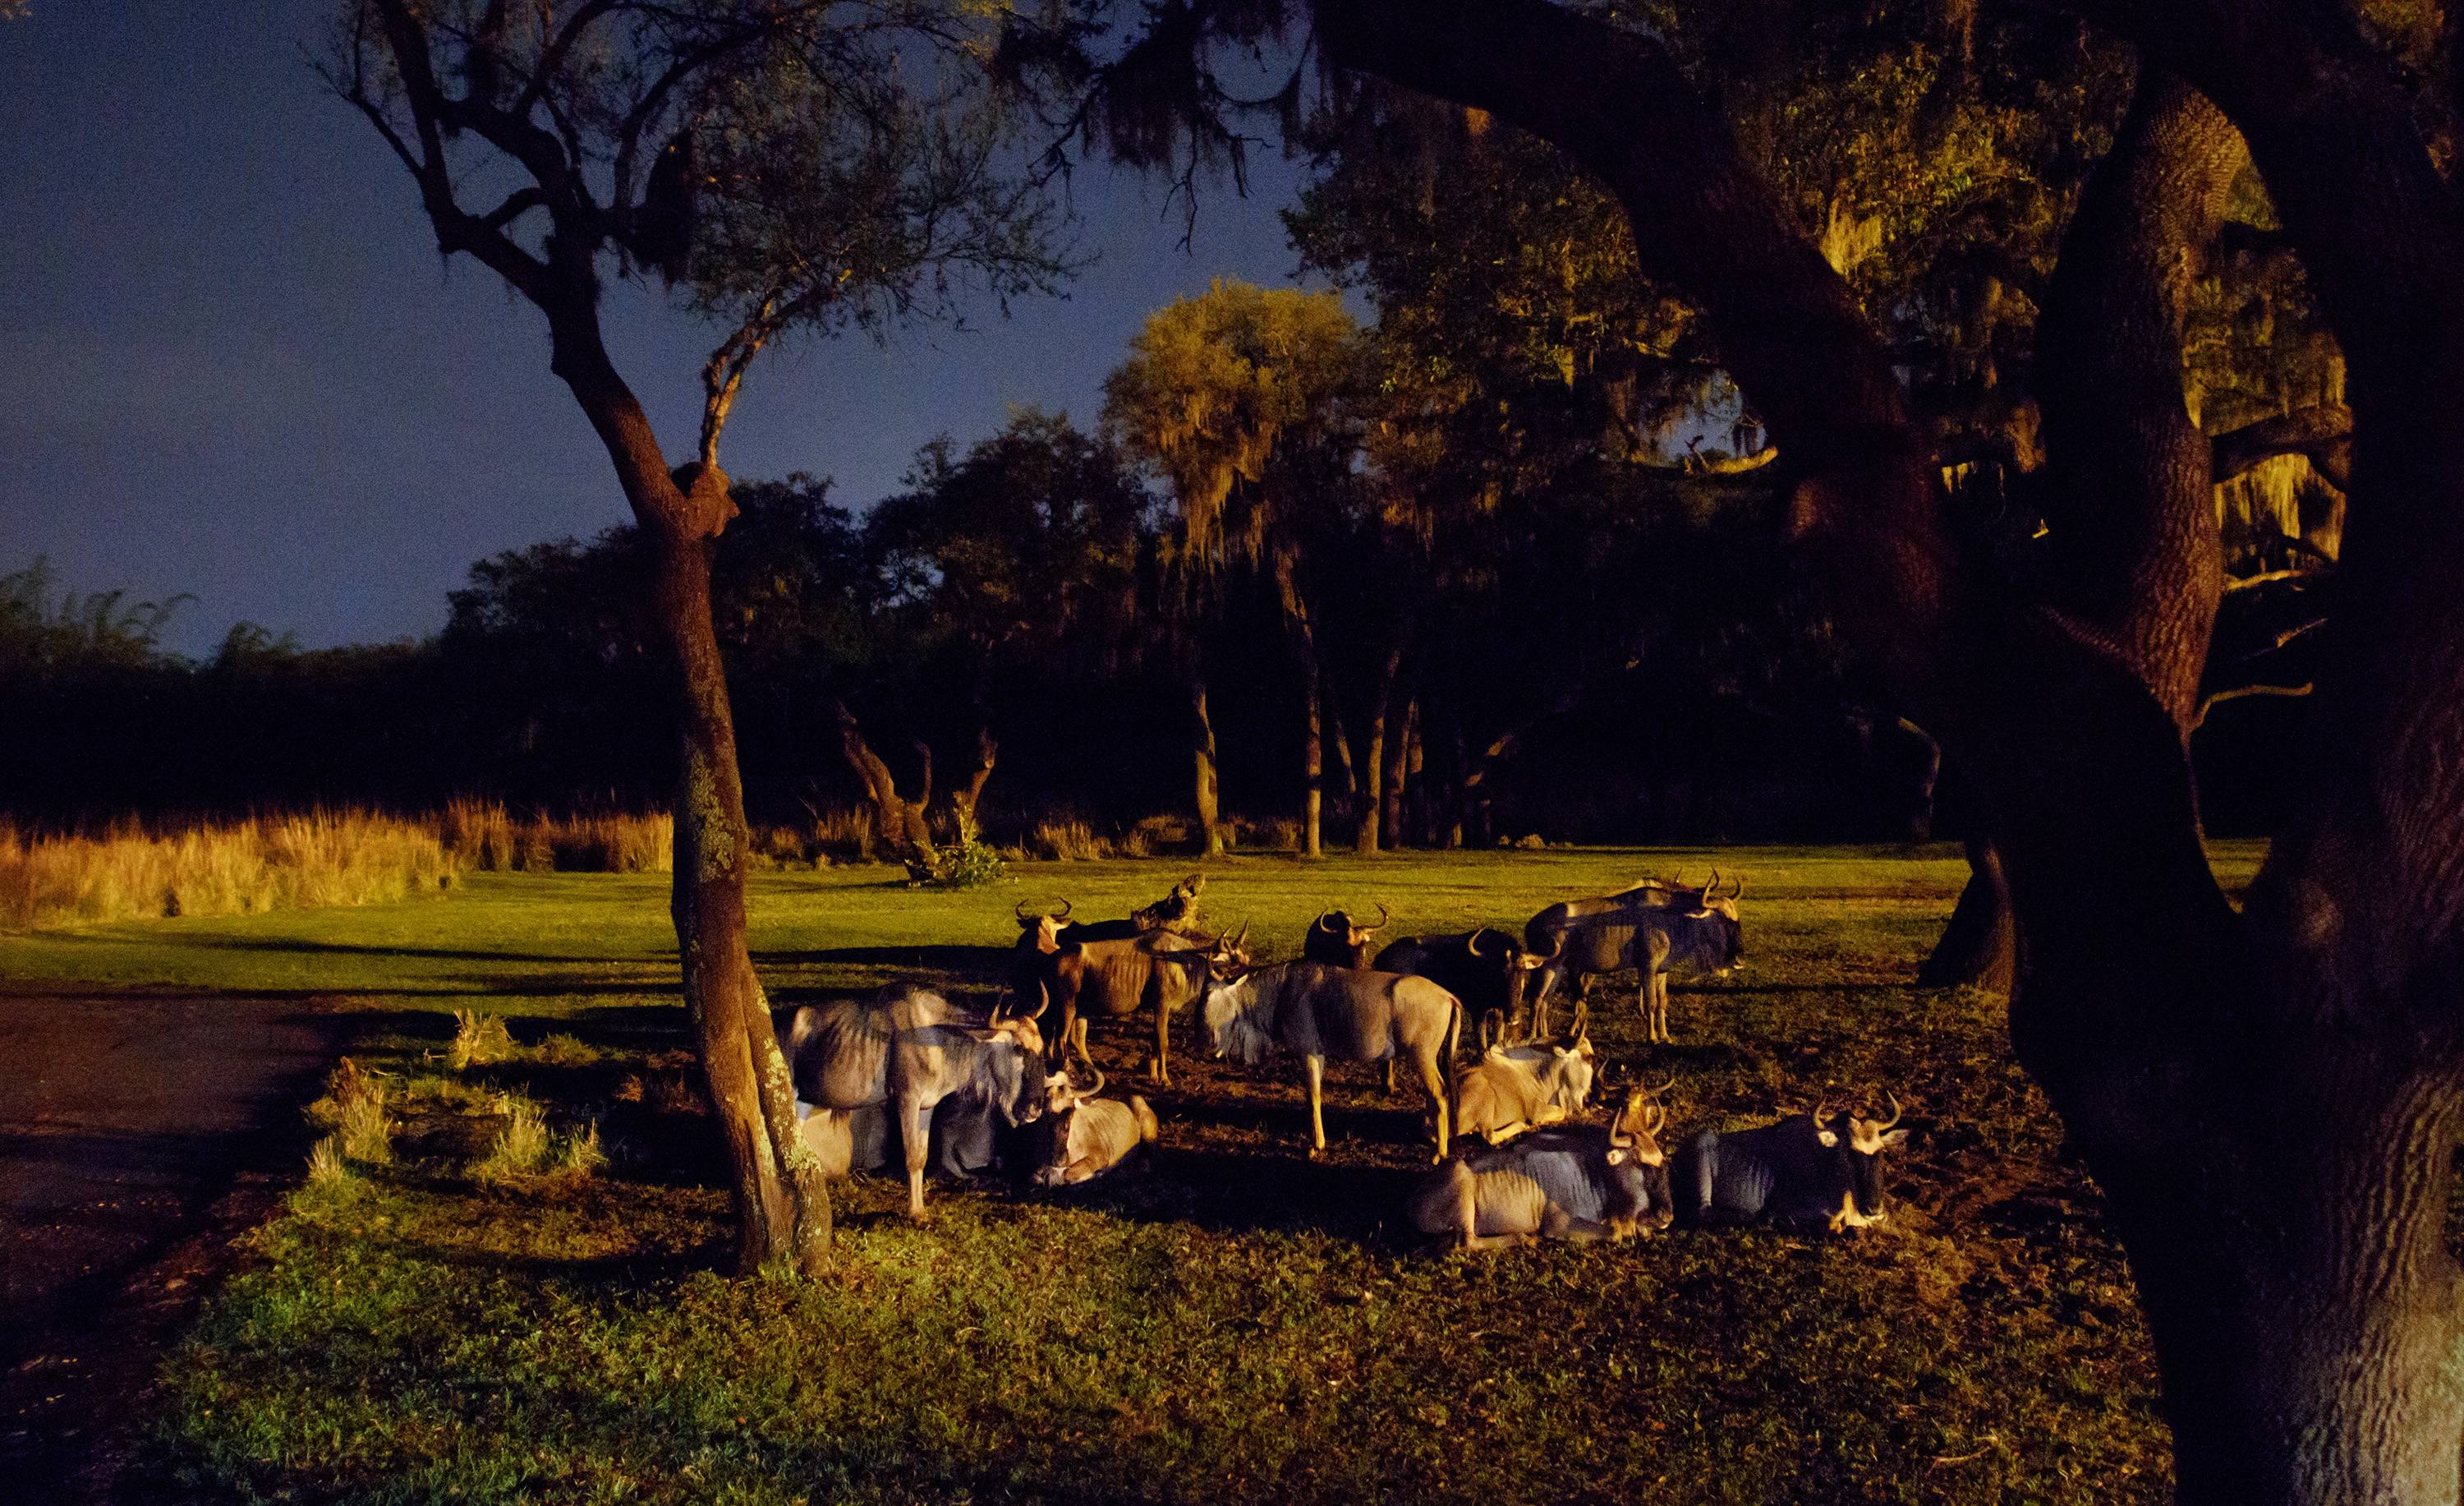 Kilimanjaro Safaris to replace 'Little Red' scene with new savannah space